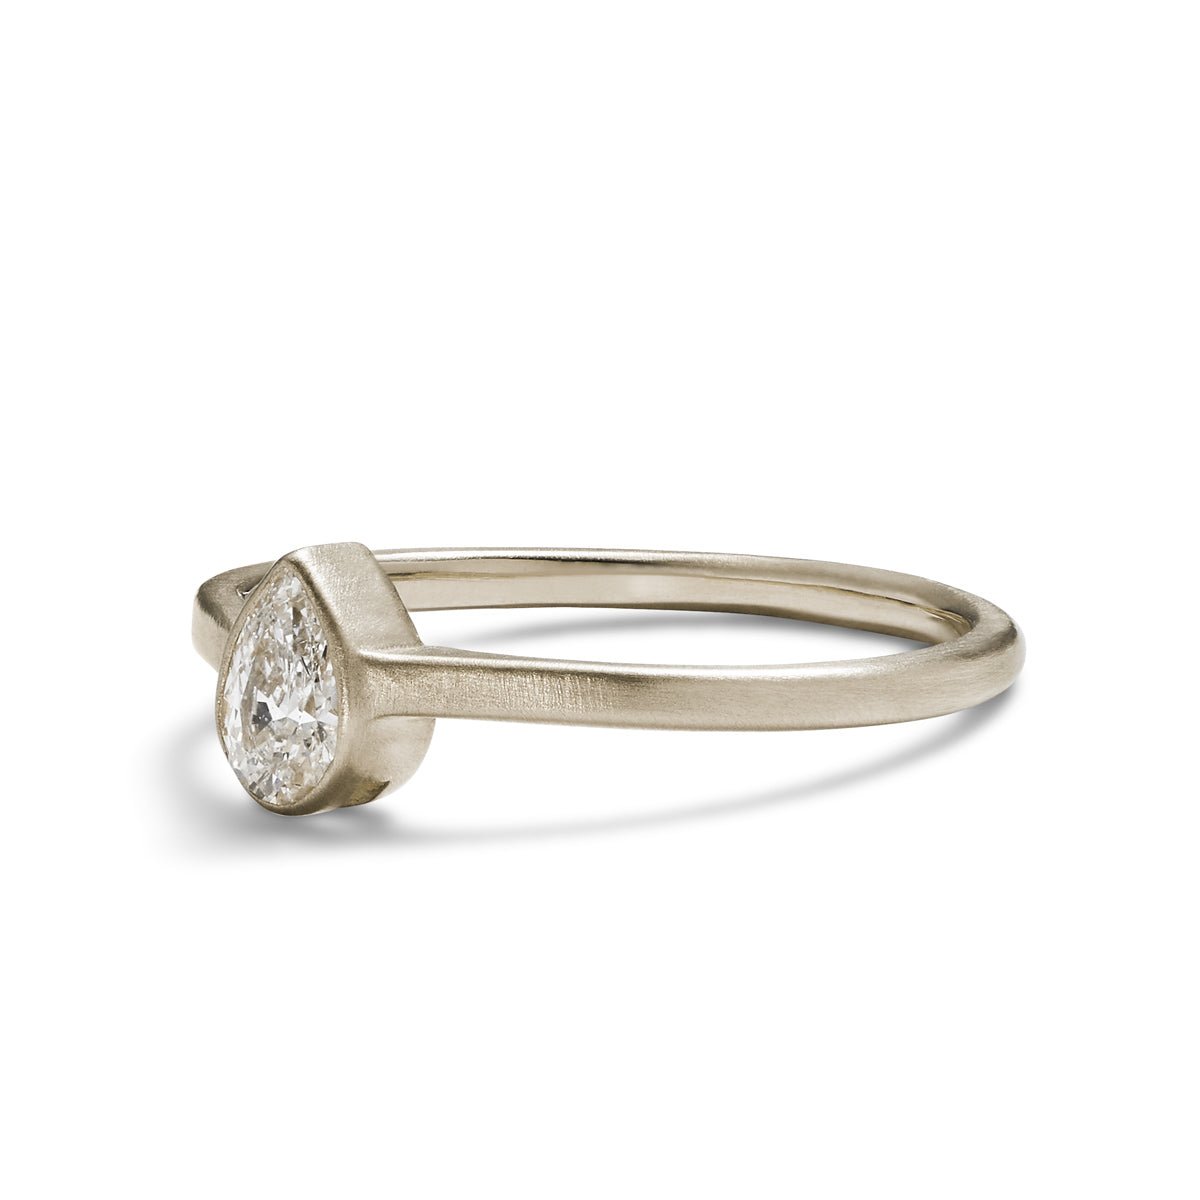 Modern pear shaped Votum ring from Betsy & Iya. With a 14K white gold band and lab-grown diamond (0.25 ct).